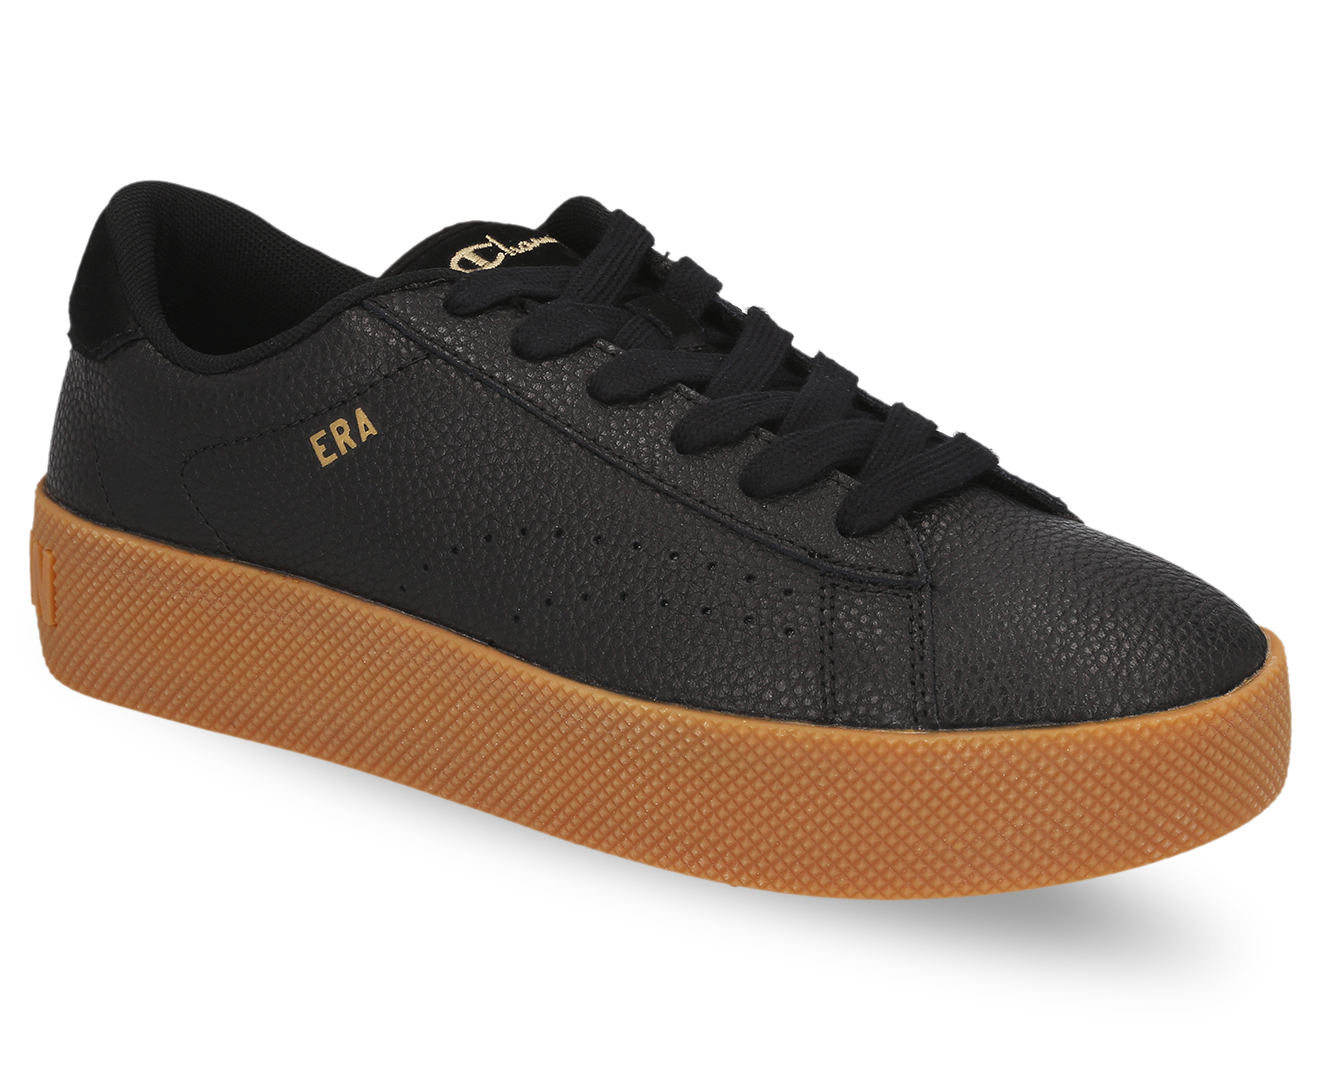 Era Leather Sneakers Shoes - Black 